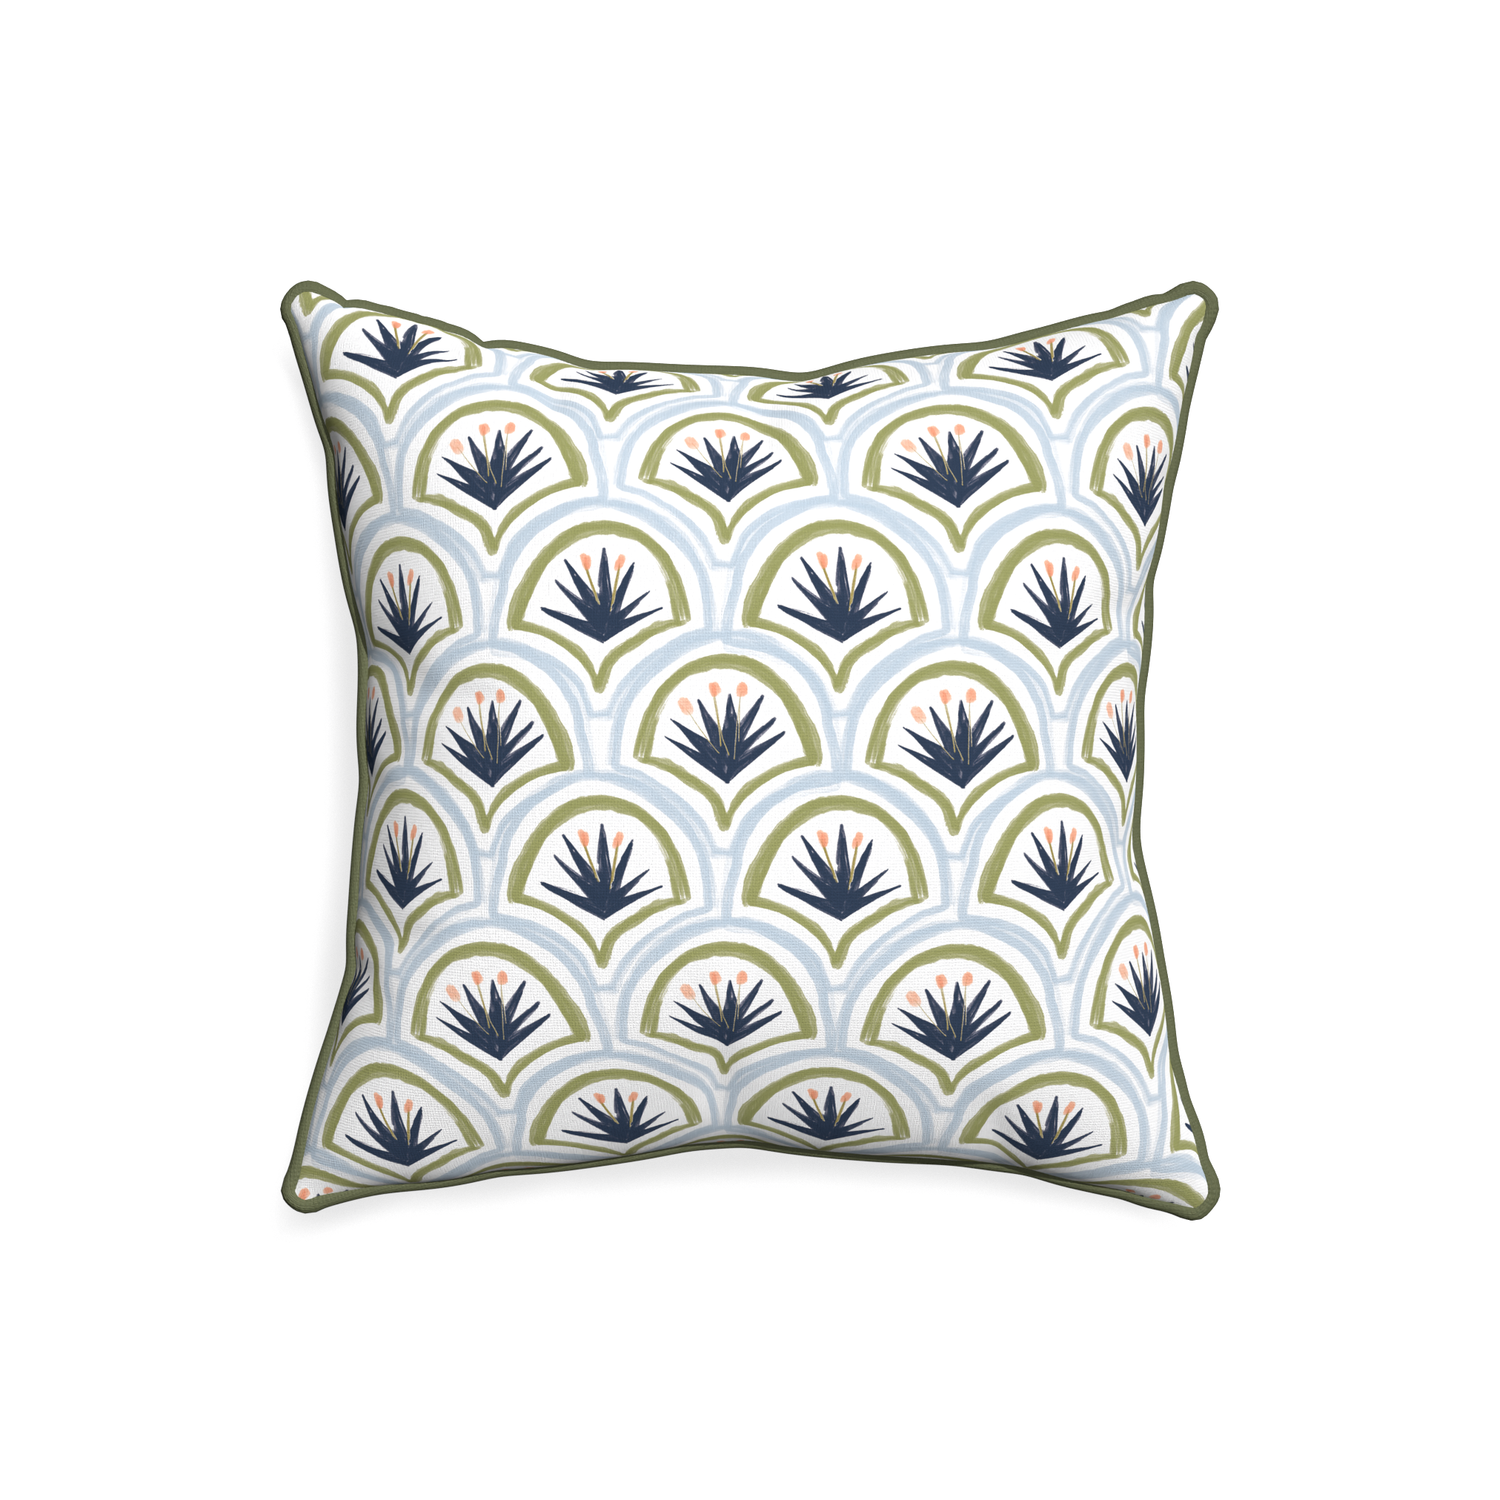 20-square thatcher midnight custom art deco palm patternpillow with f piping on white background